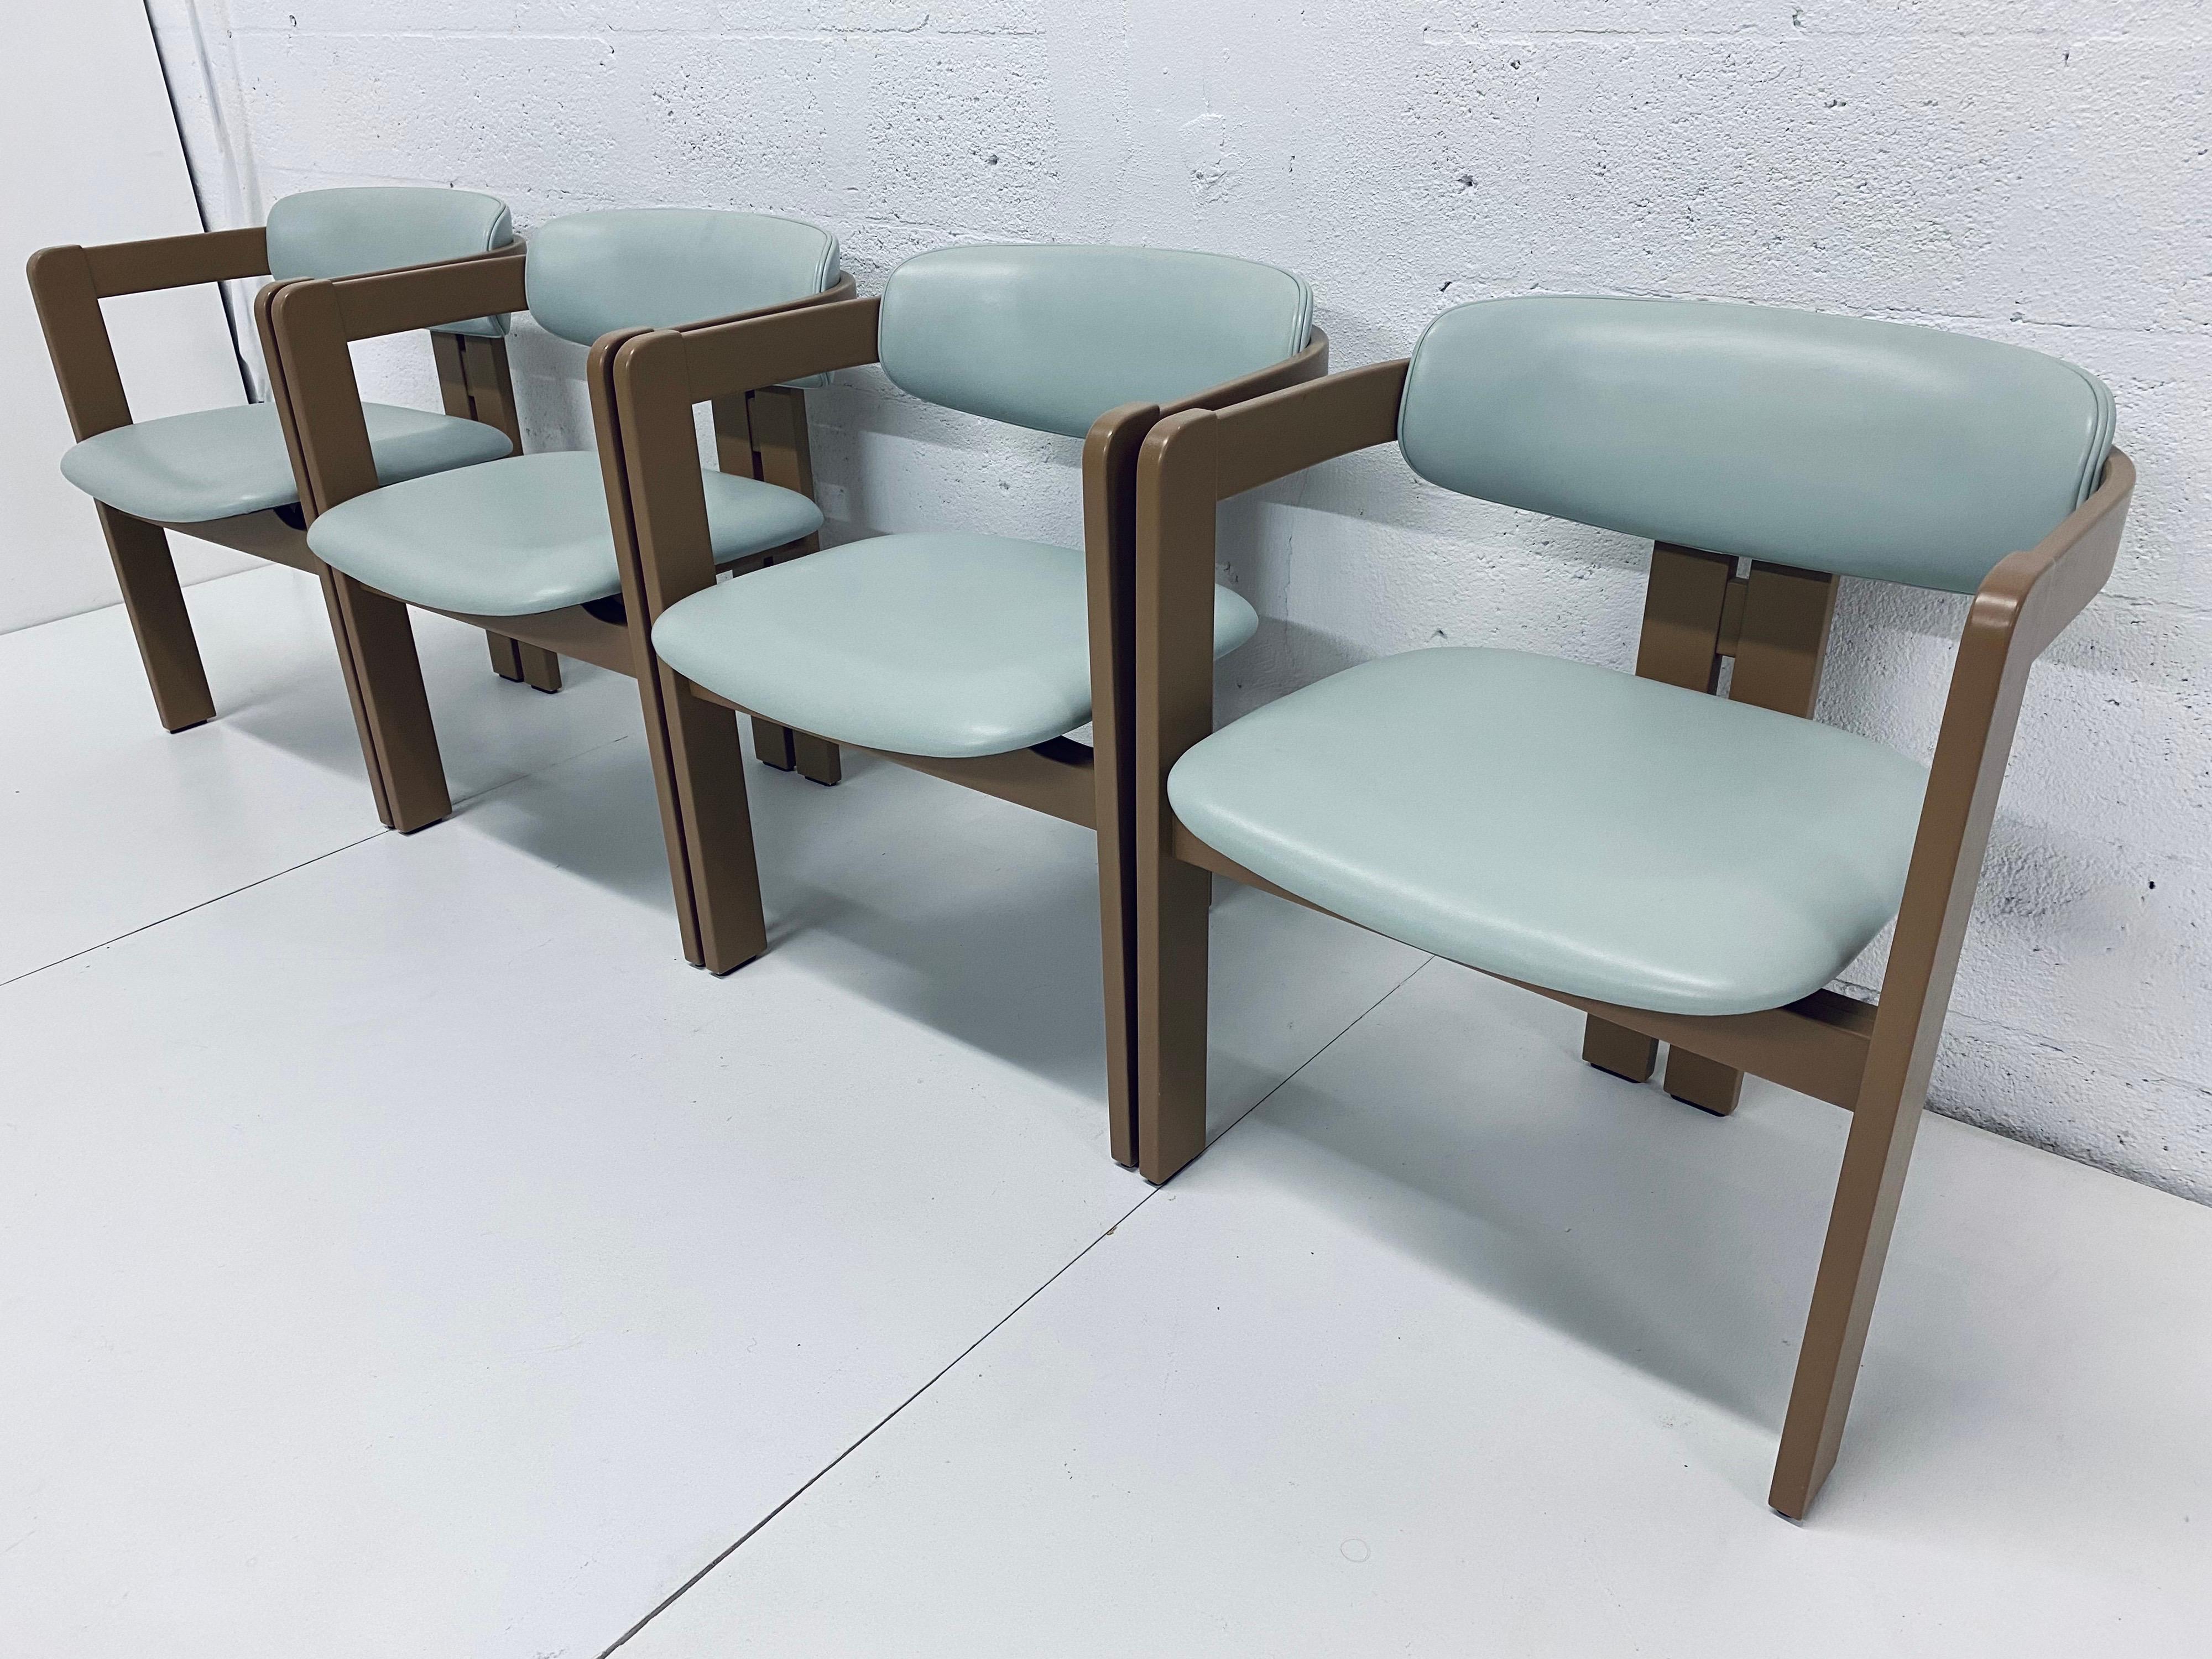 Set of four light turquoise leather and tan lacquered wood frame dining chairs inspired by Augusto Savini and manufactured for Pozzi, Italy.  These chairs are manufactured by Pozzi and maintain the original fabric backing but have a few design